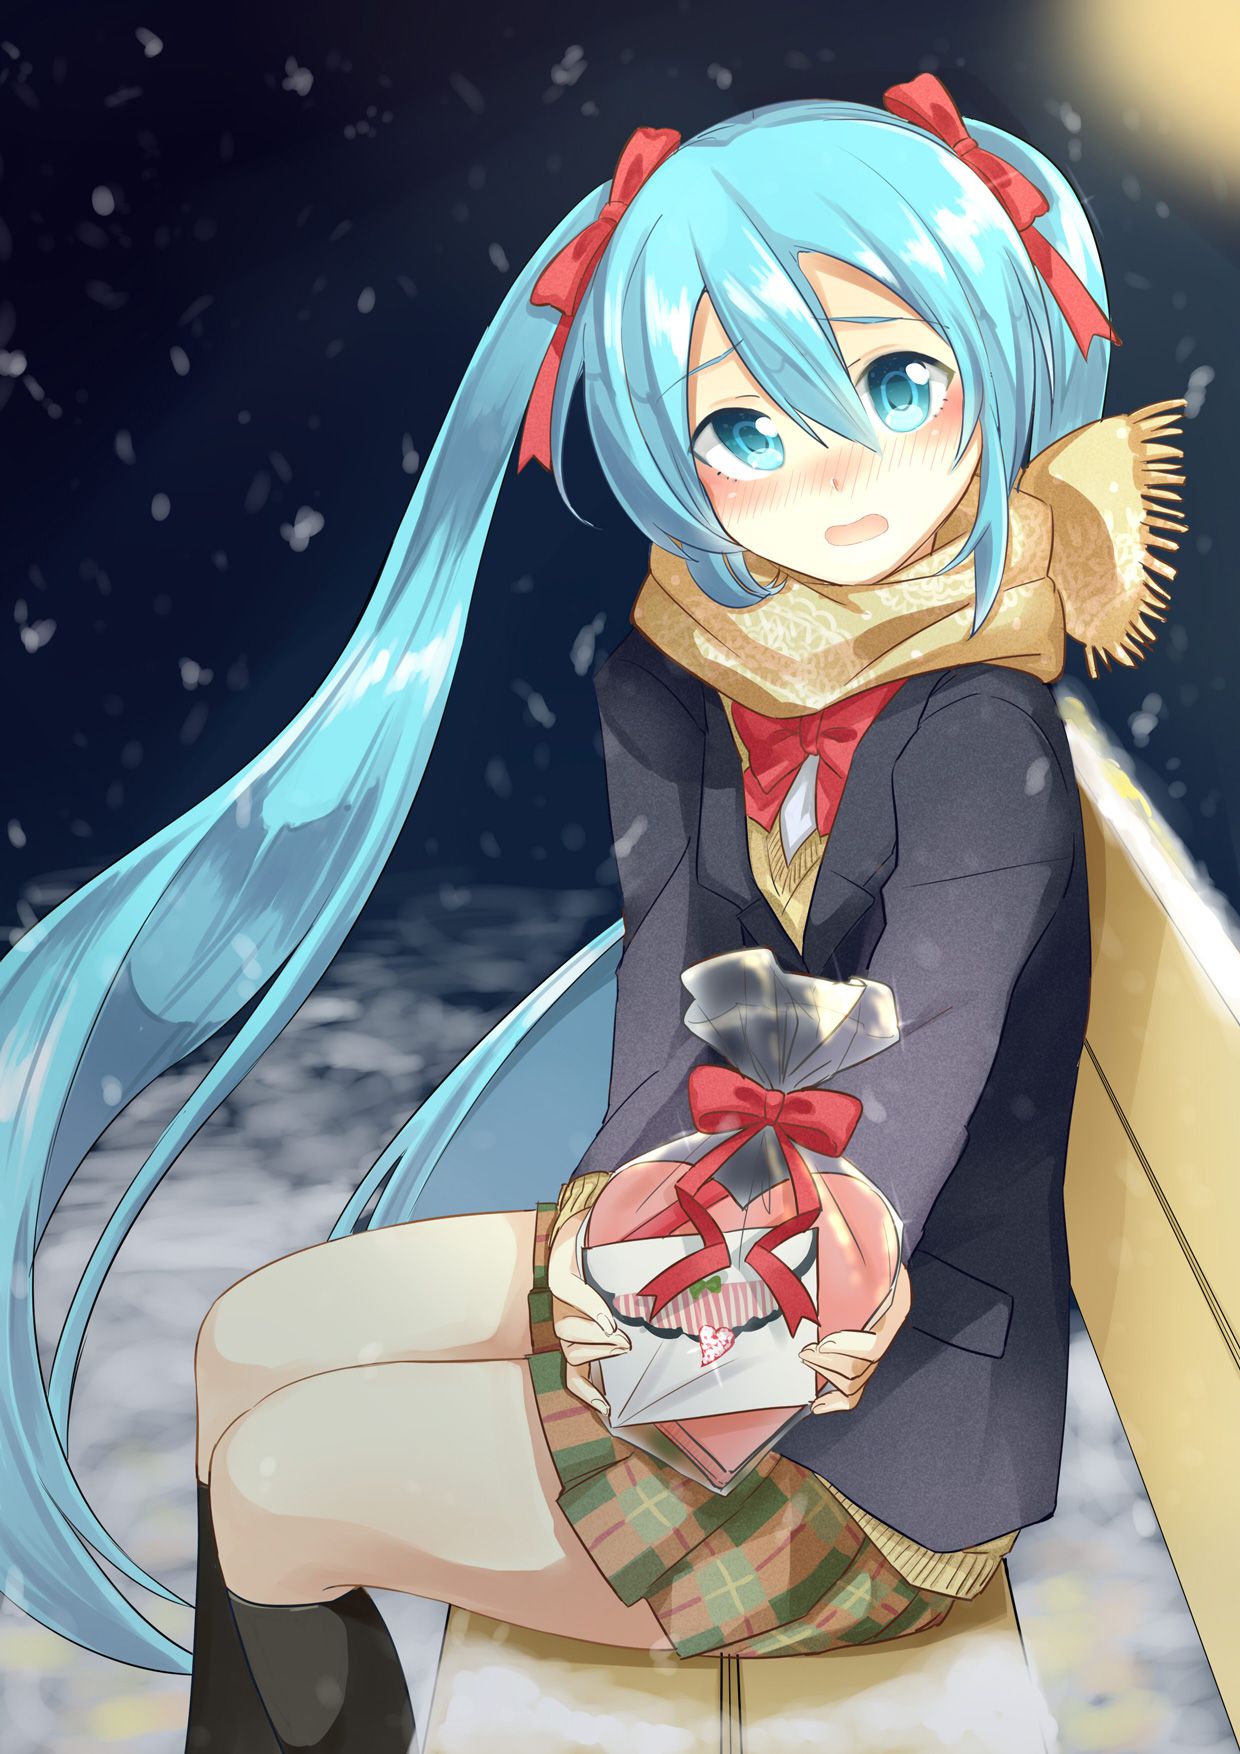 Assorted Miku images after a long absence. 21